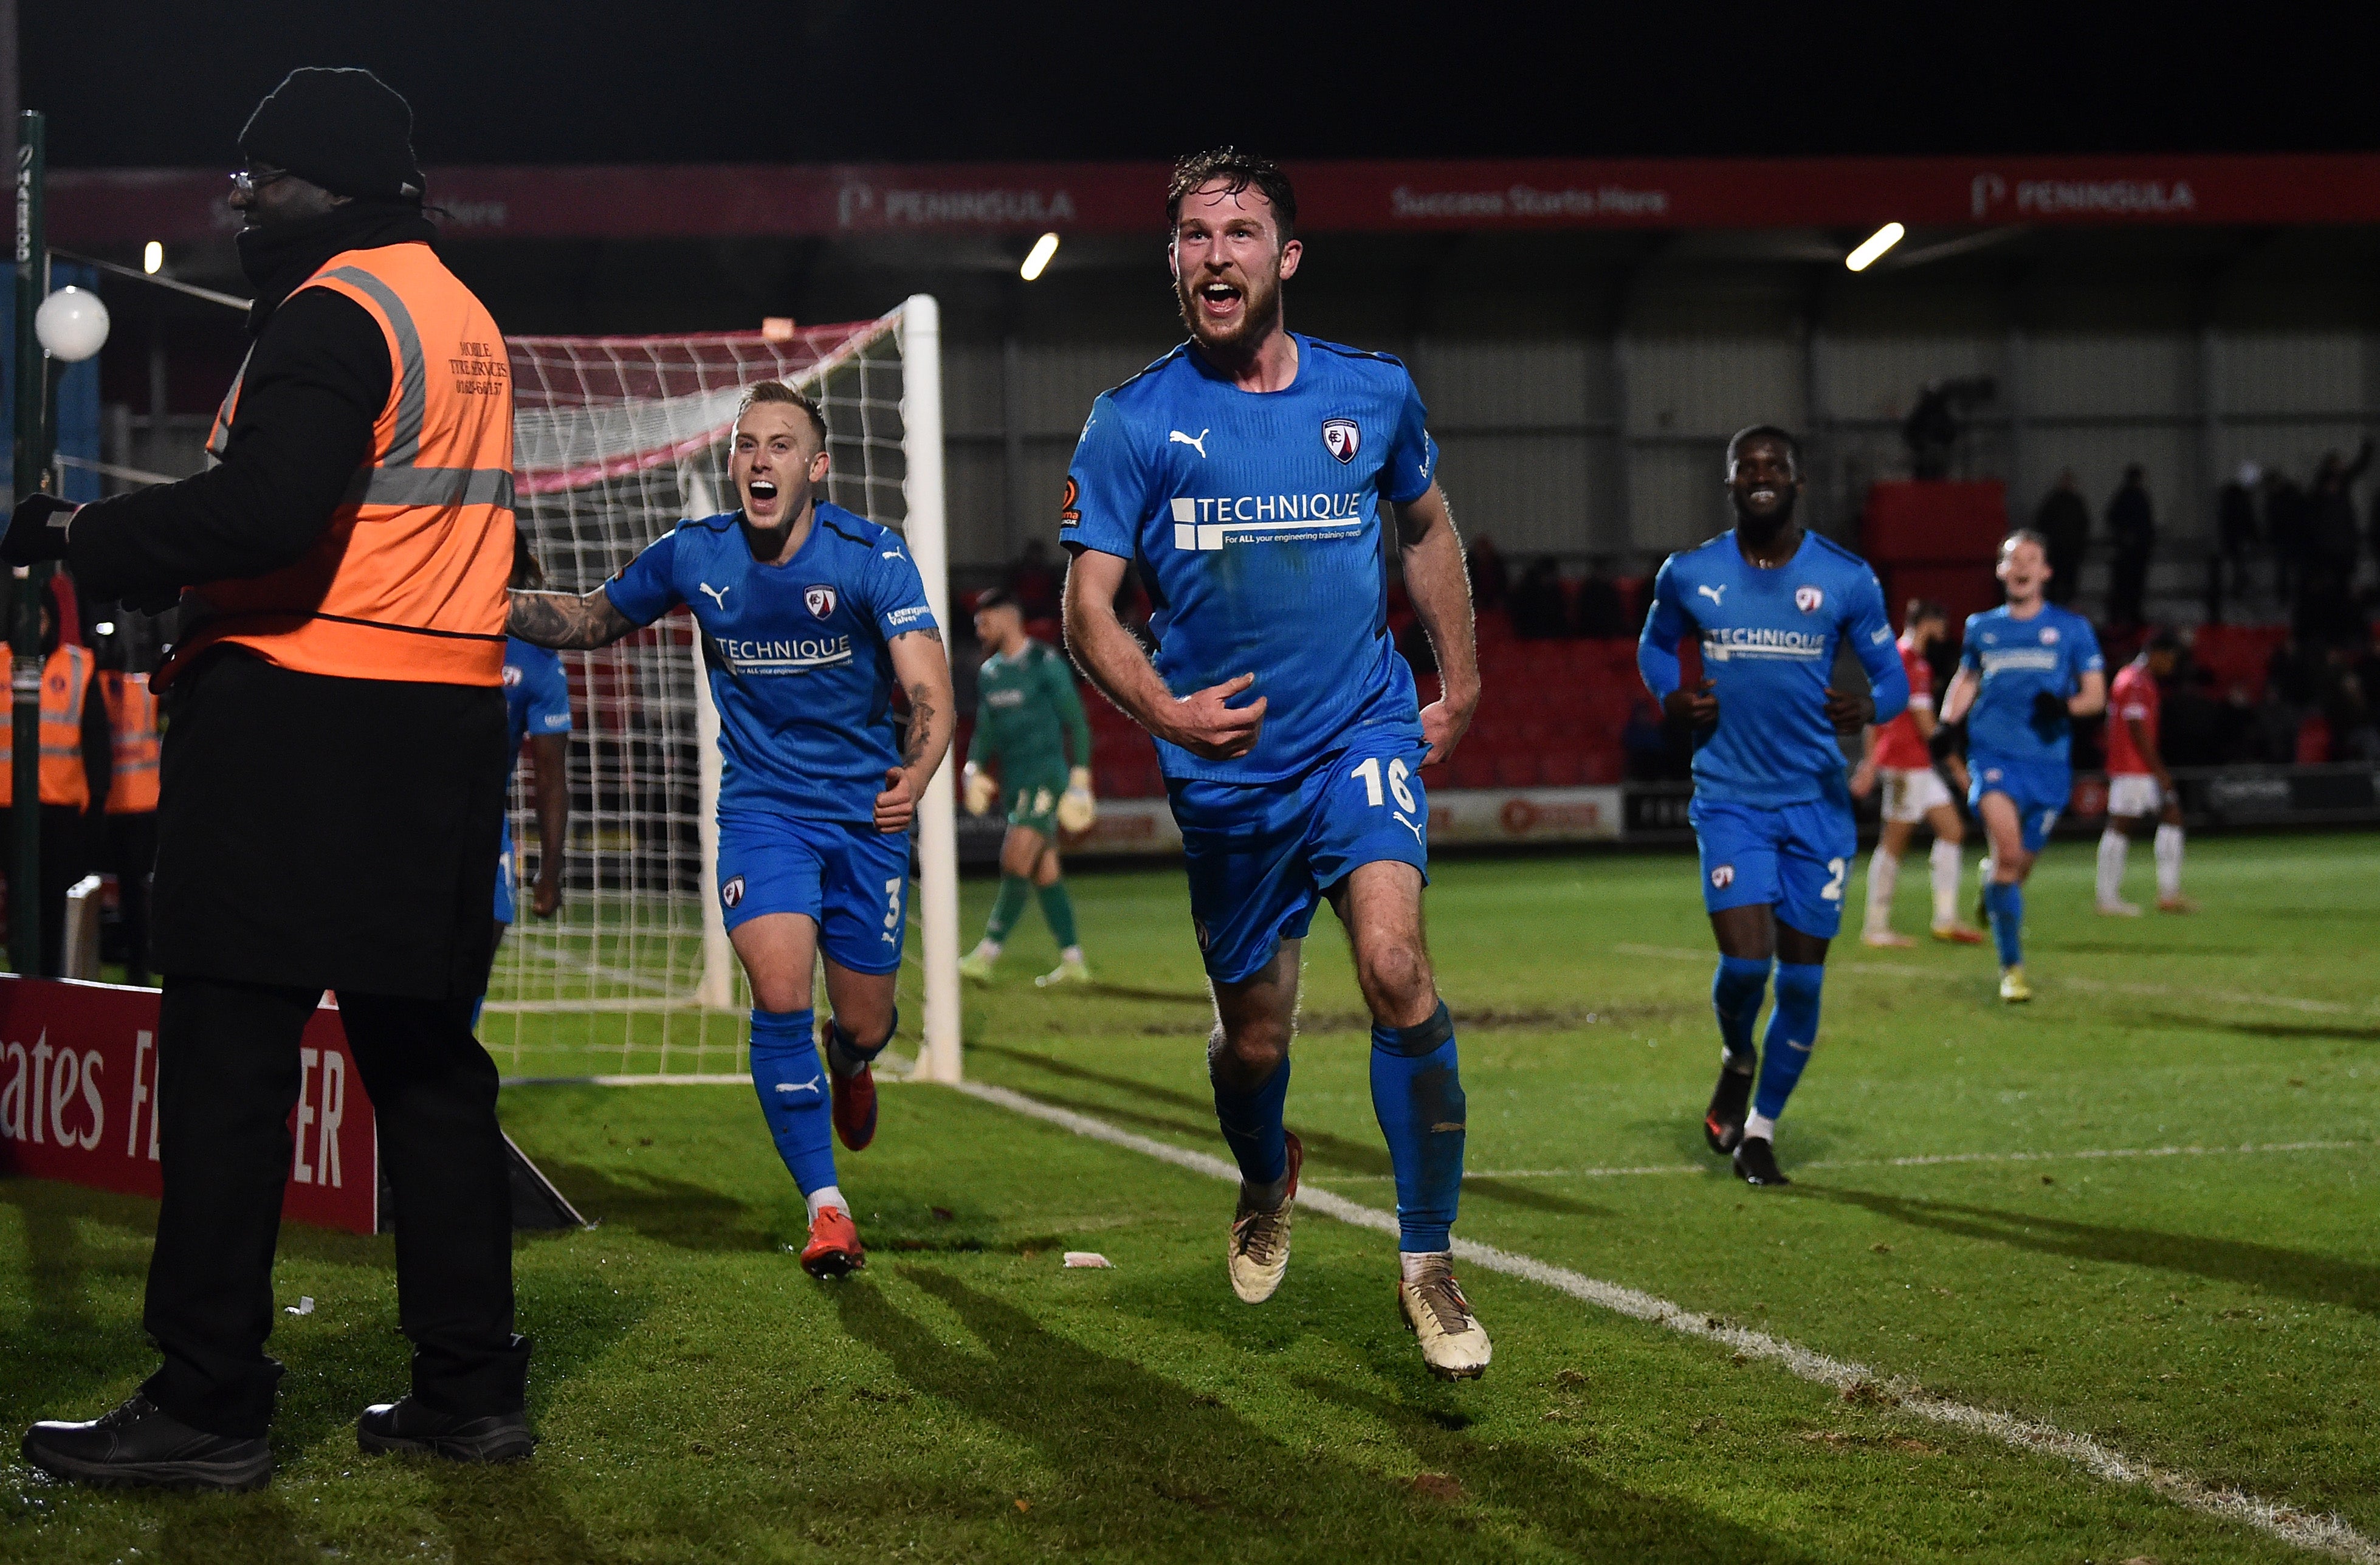 Chesterfield beat Salford City to reach the third round and earn a trip to Stamford Bridge